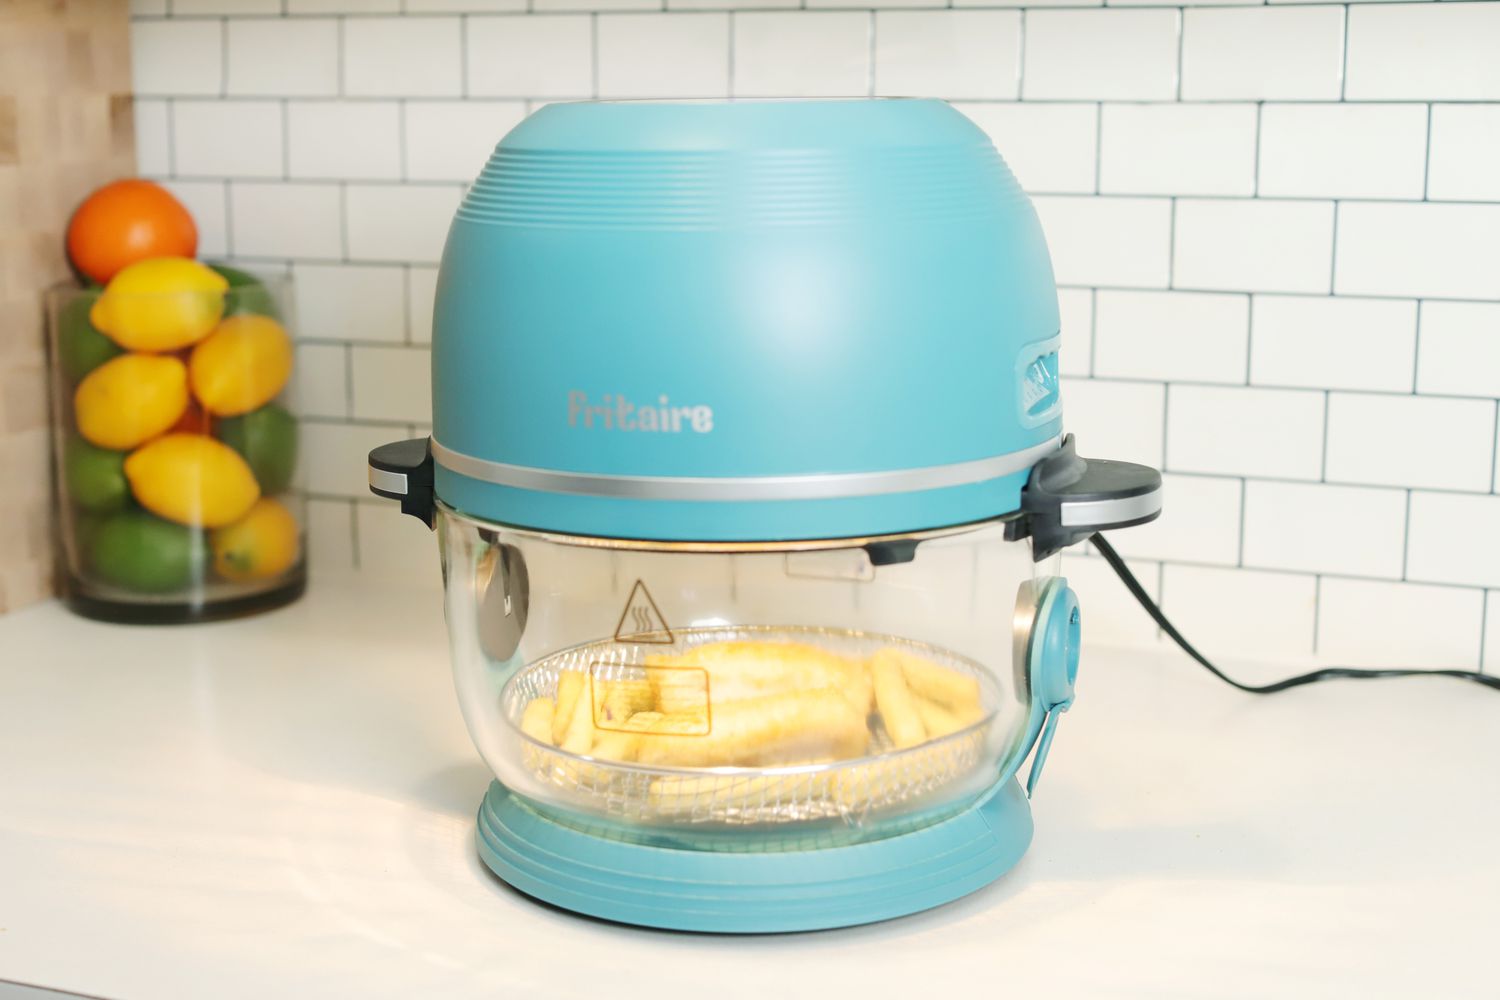 Fries cooking in the Fritaire Glass Bowl Air Fryer